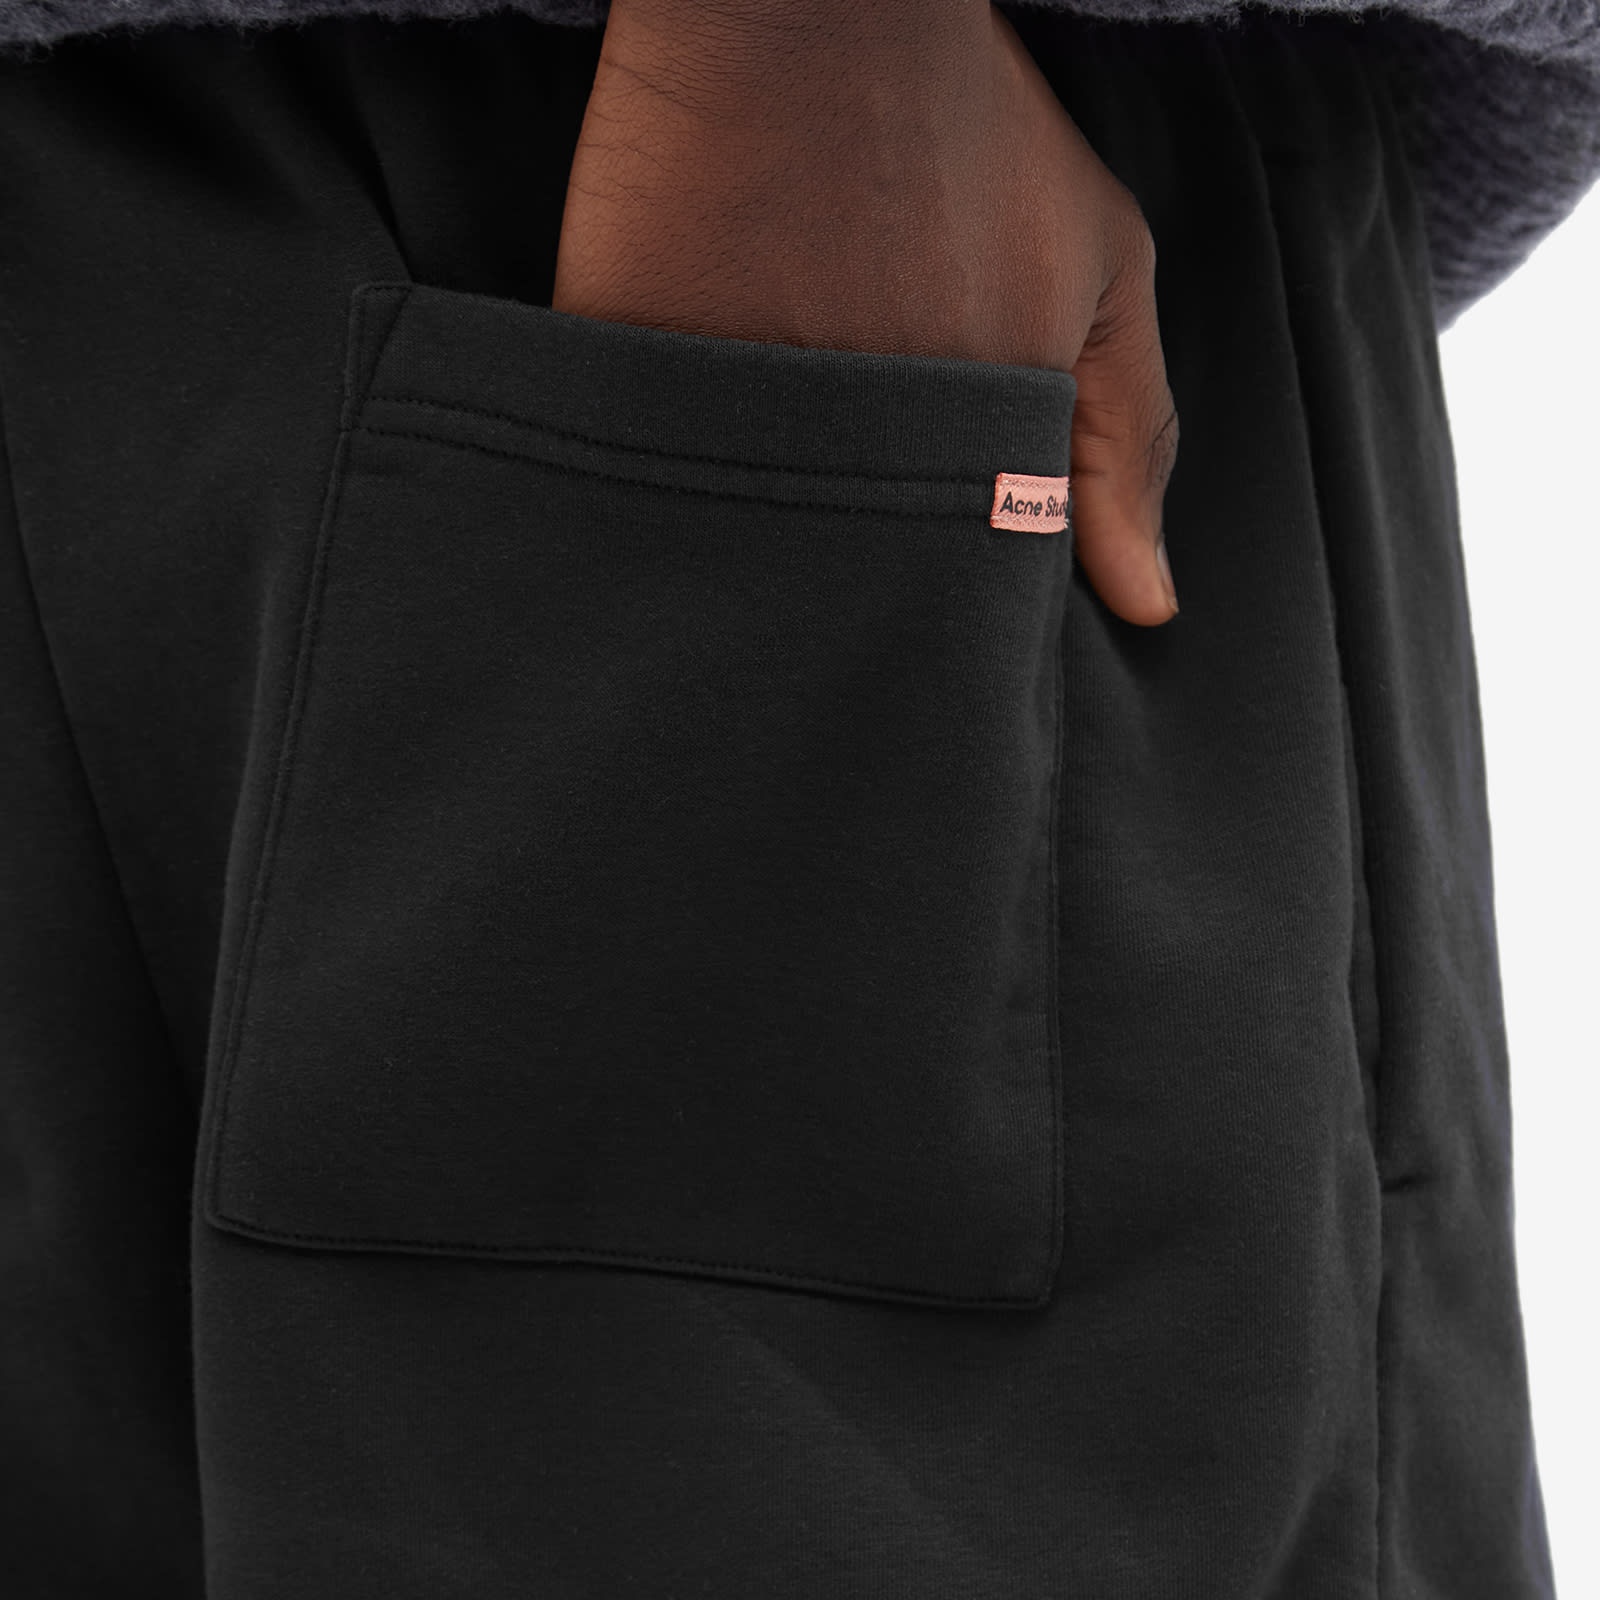 Acne Studios Forge Pink Label Sweat Shorts - 5